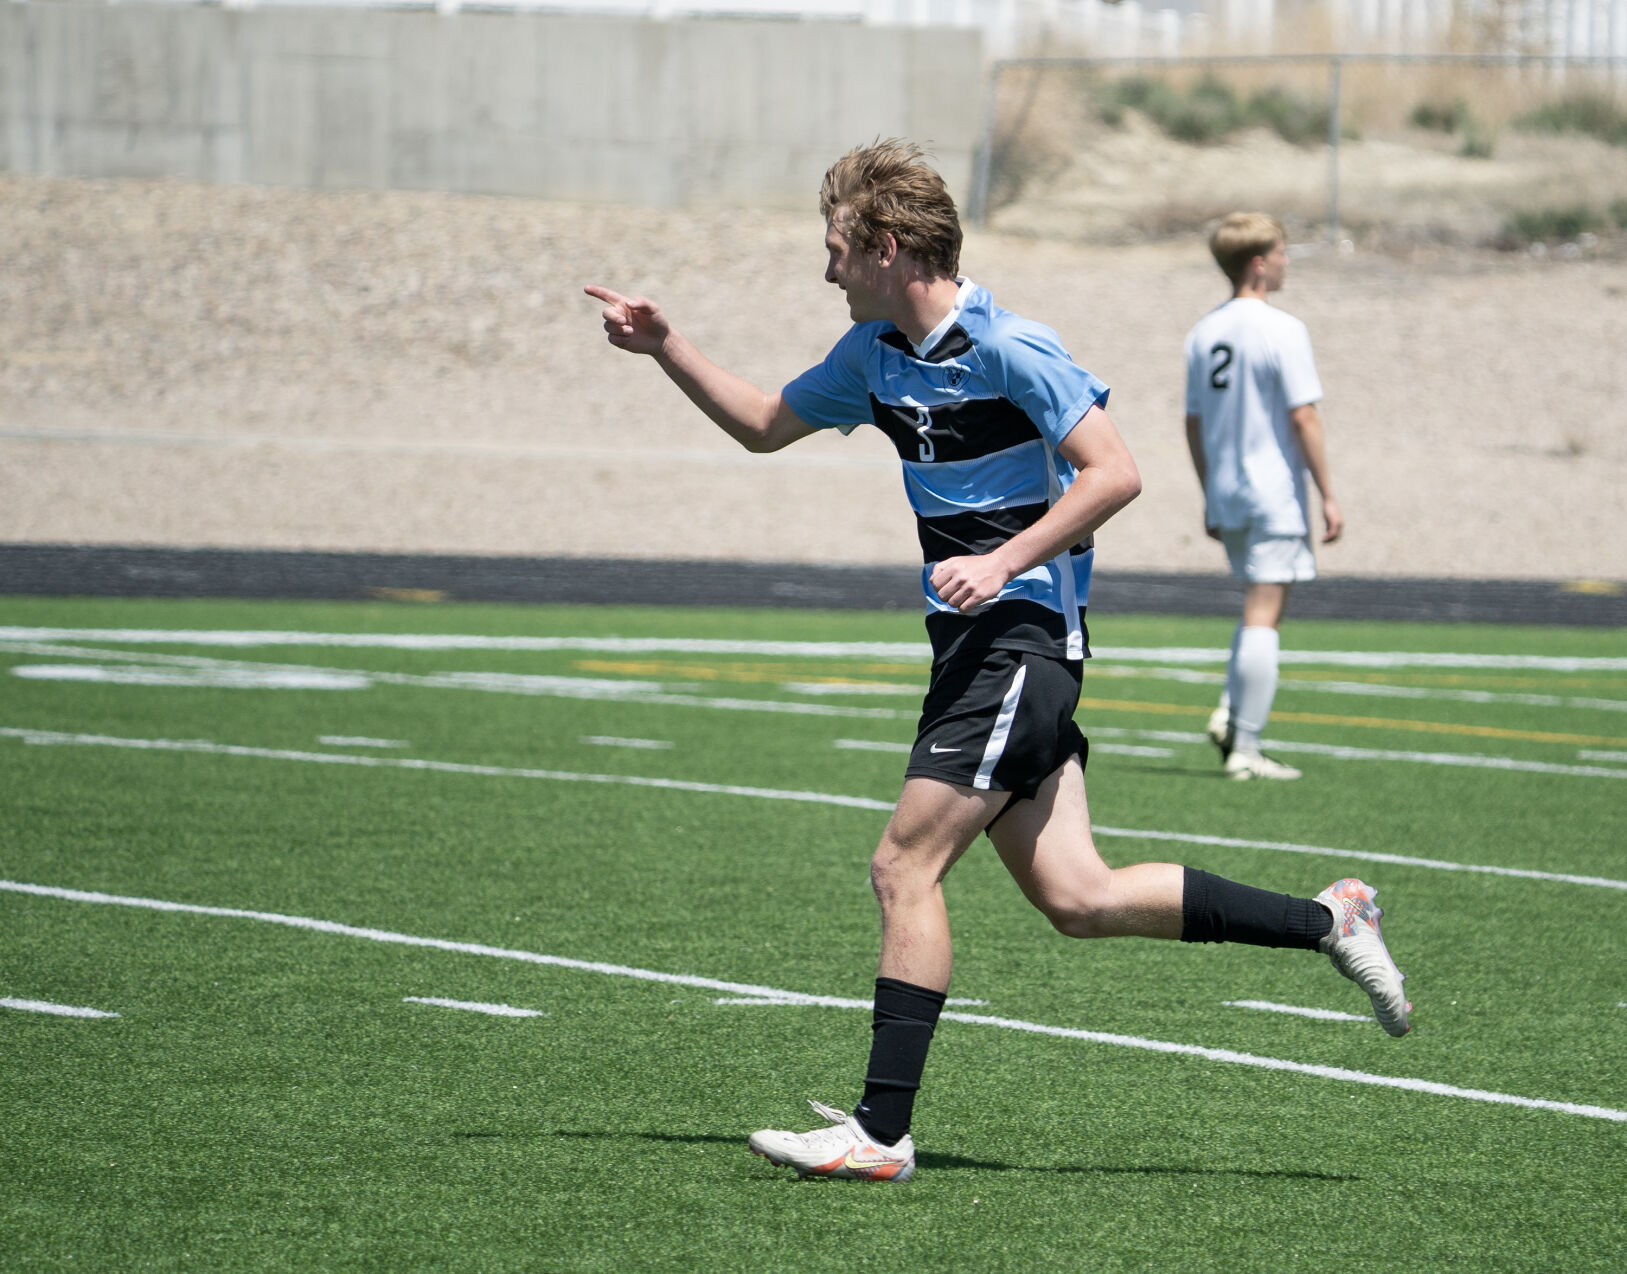 Cheyenne East Secures 5th Place with 2-0 Victory: Sallee & Bohlmann Lead The Charge